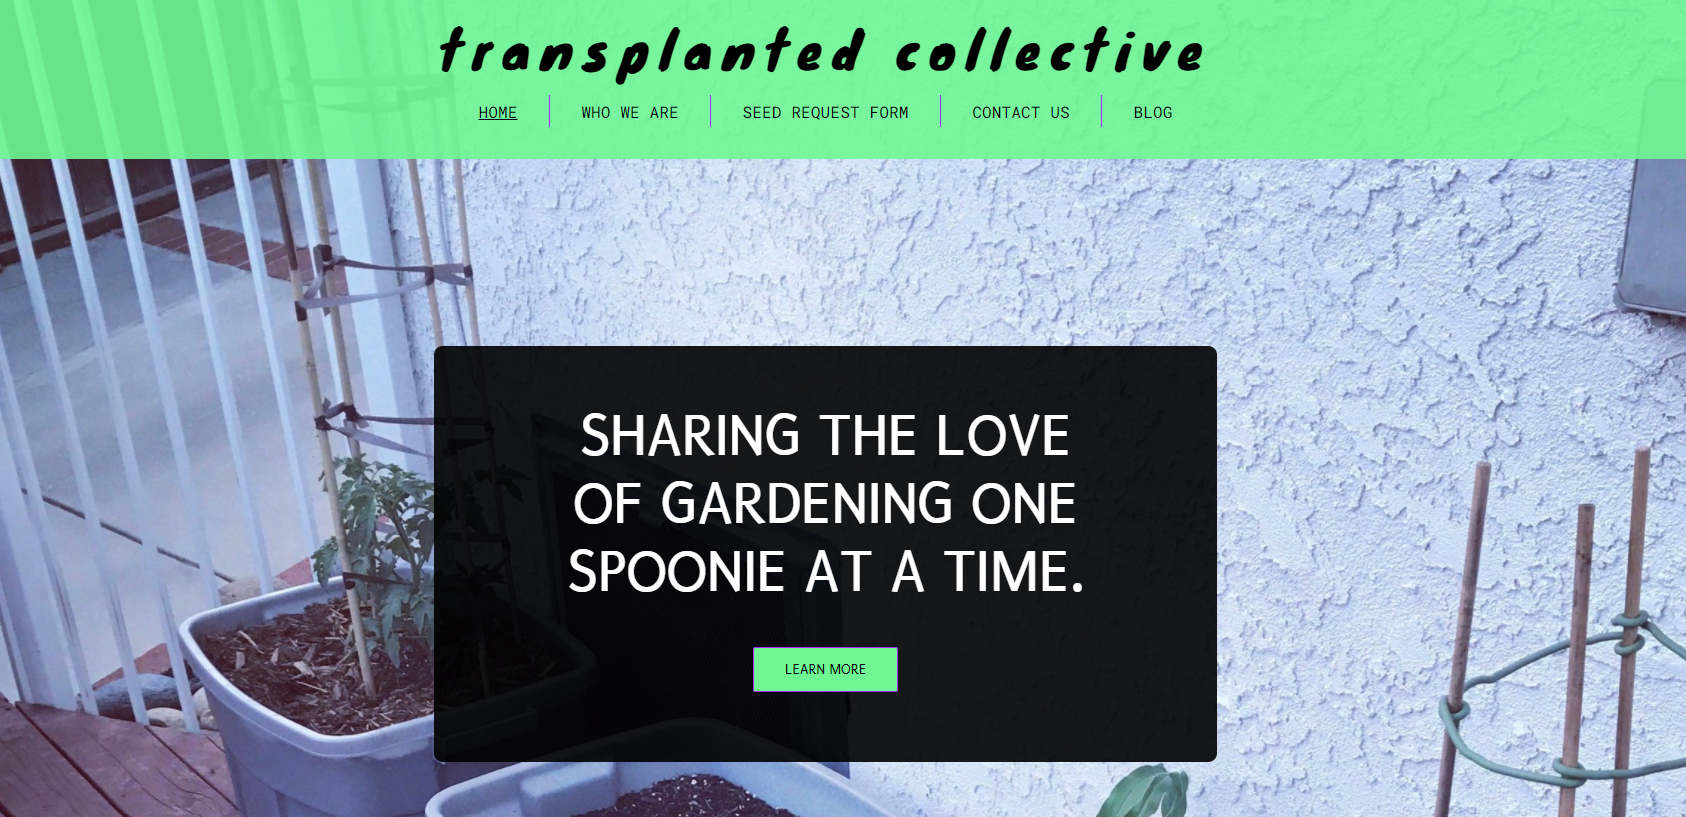 transplanted collective website screenshot that says: Transplanted Collective, Sharing the Love of Gardening One Spoonie at a Time